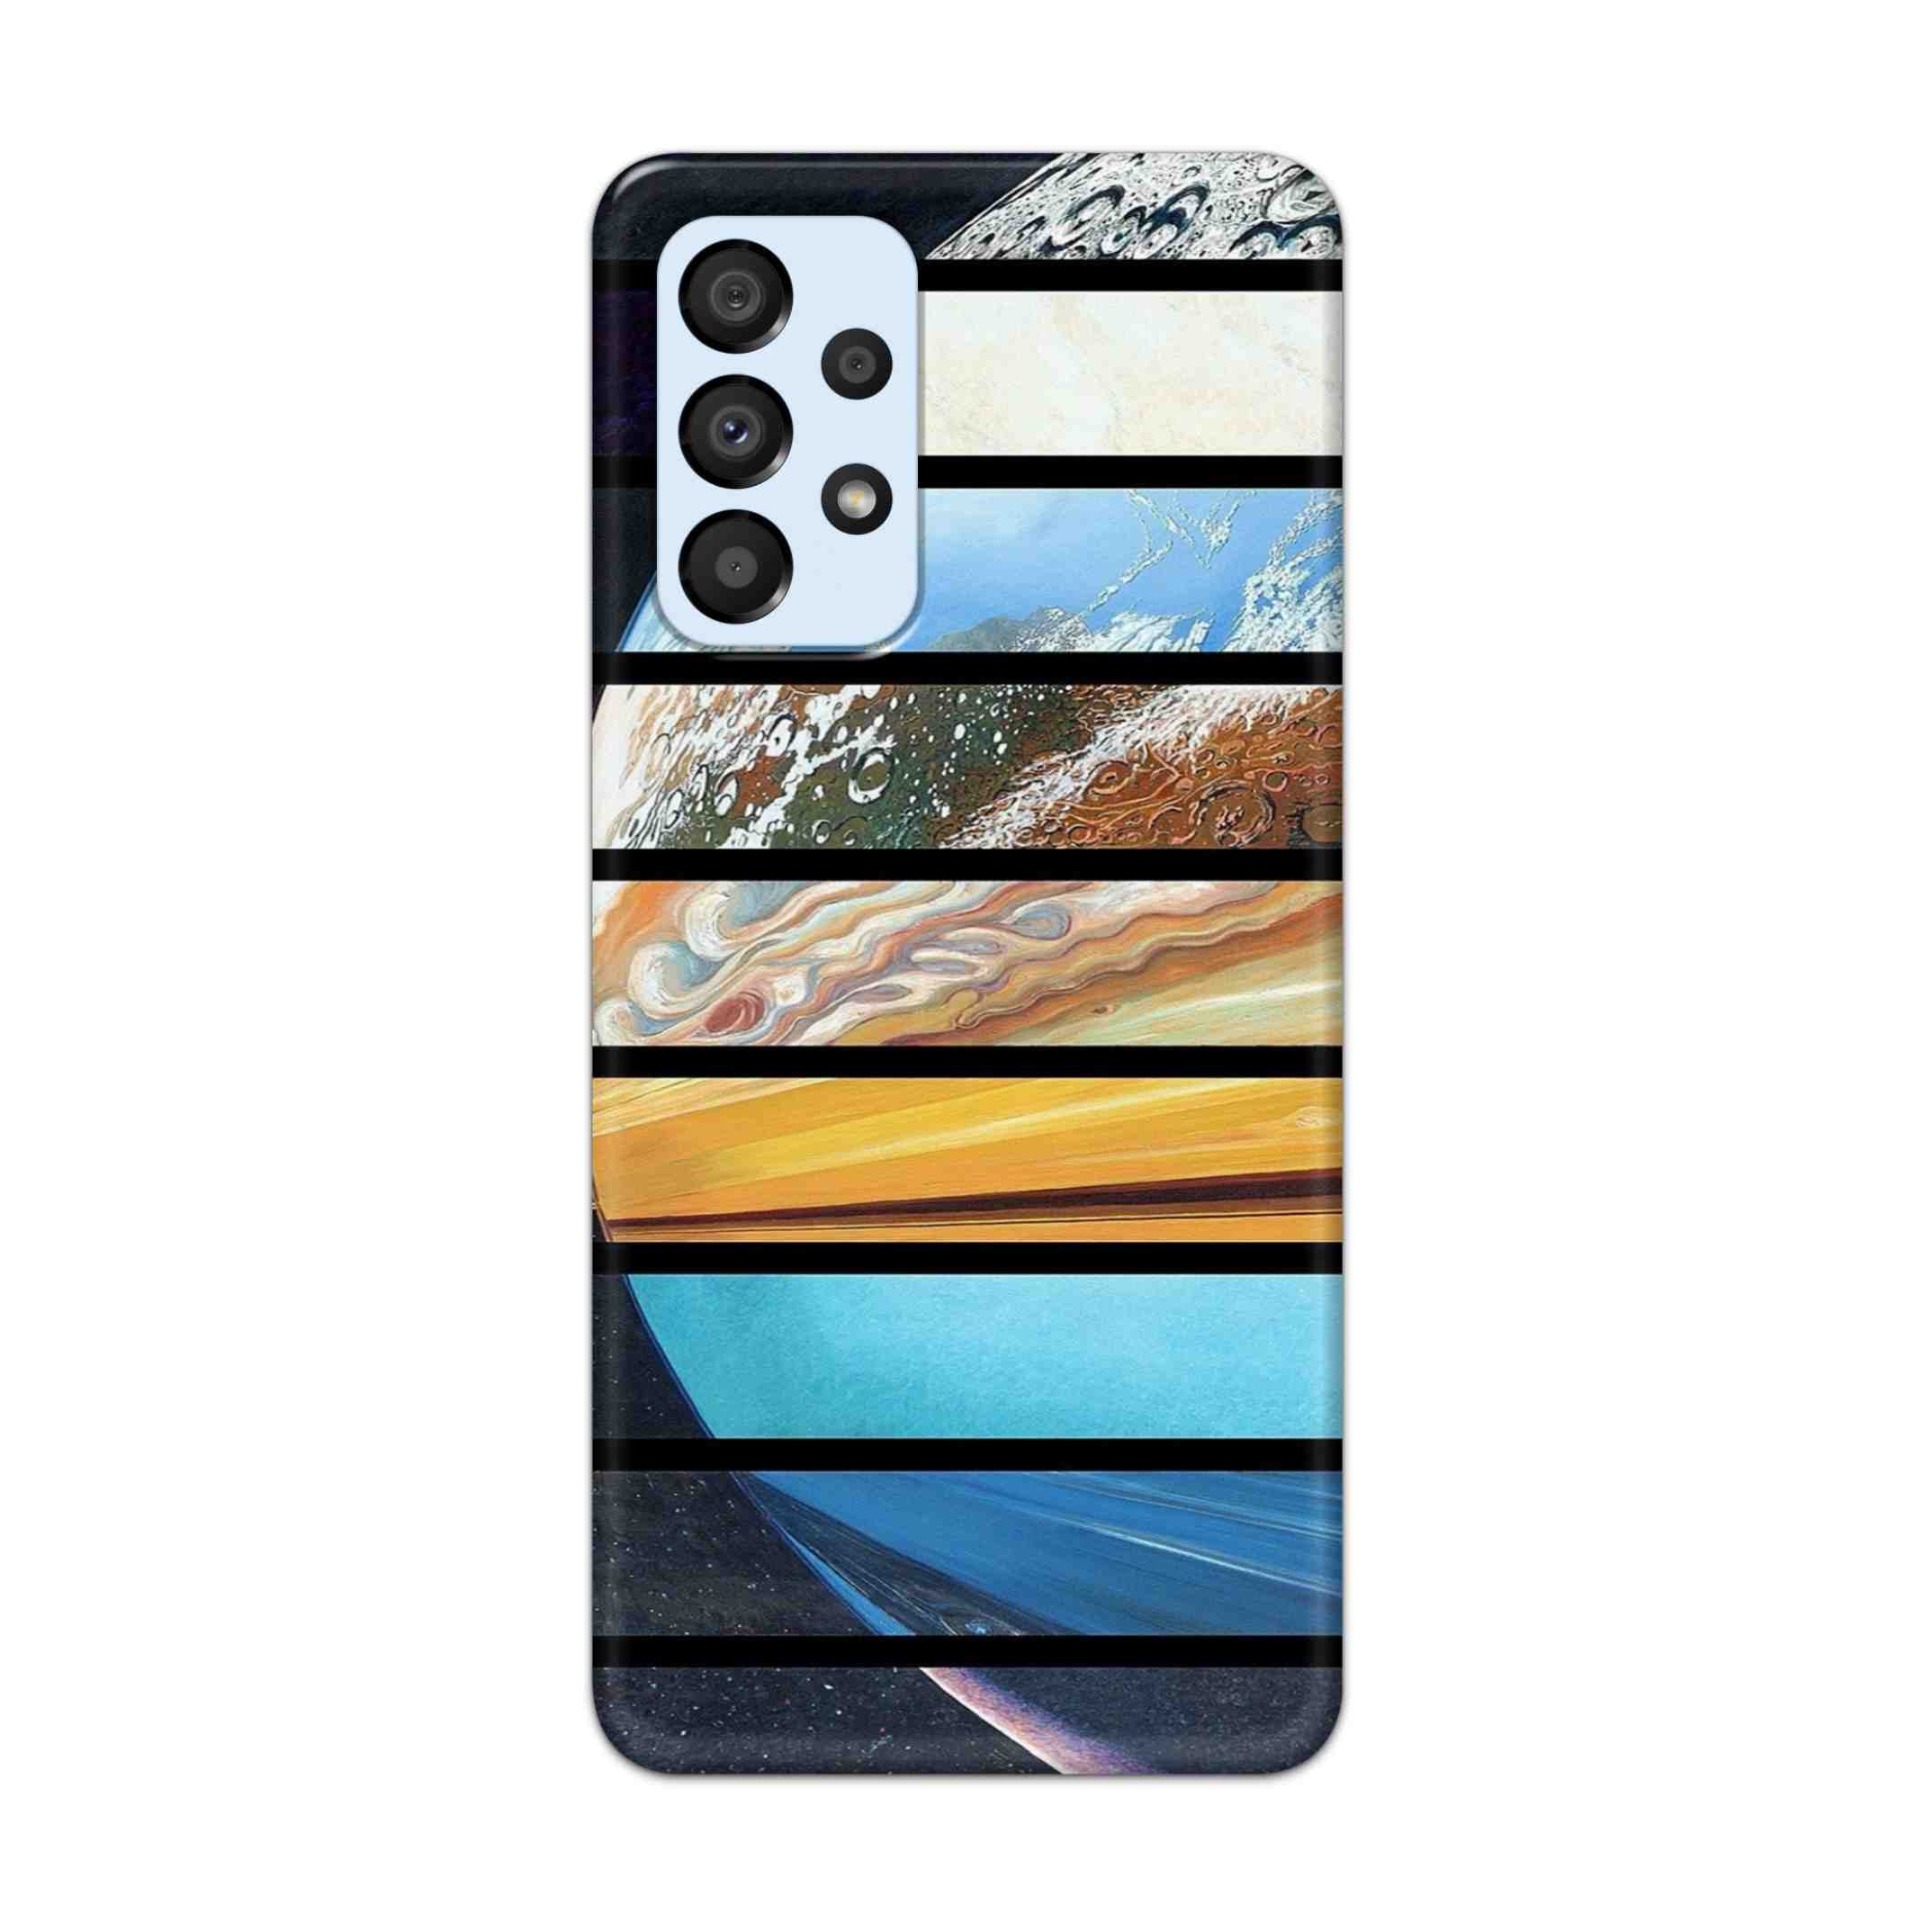 Buy Colourful Earth Hard Back Mobile Phone Case Cover For Samsung A33 5G Online